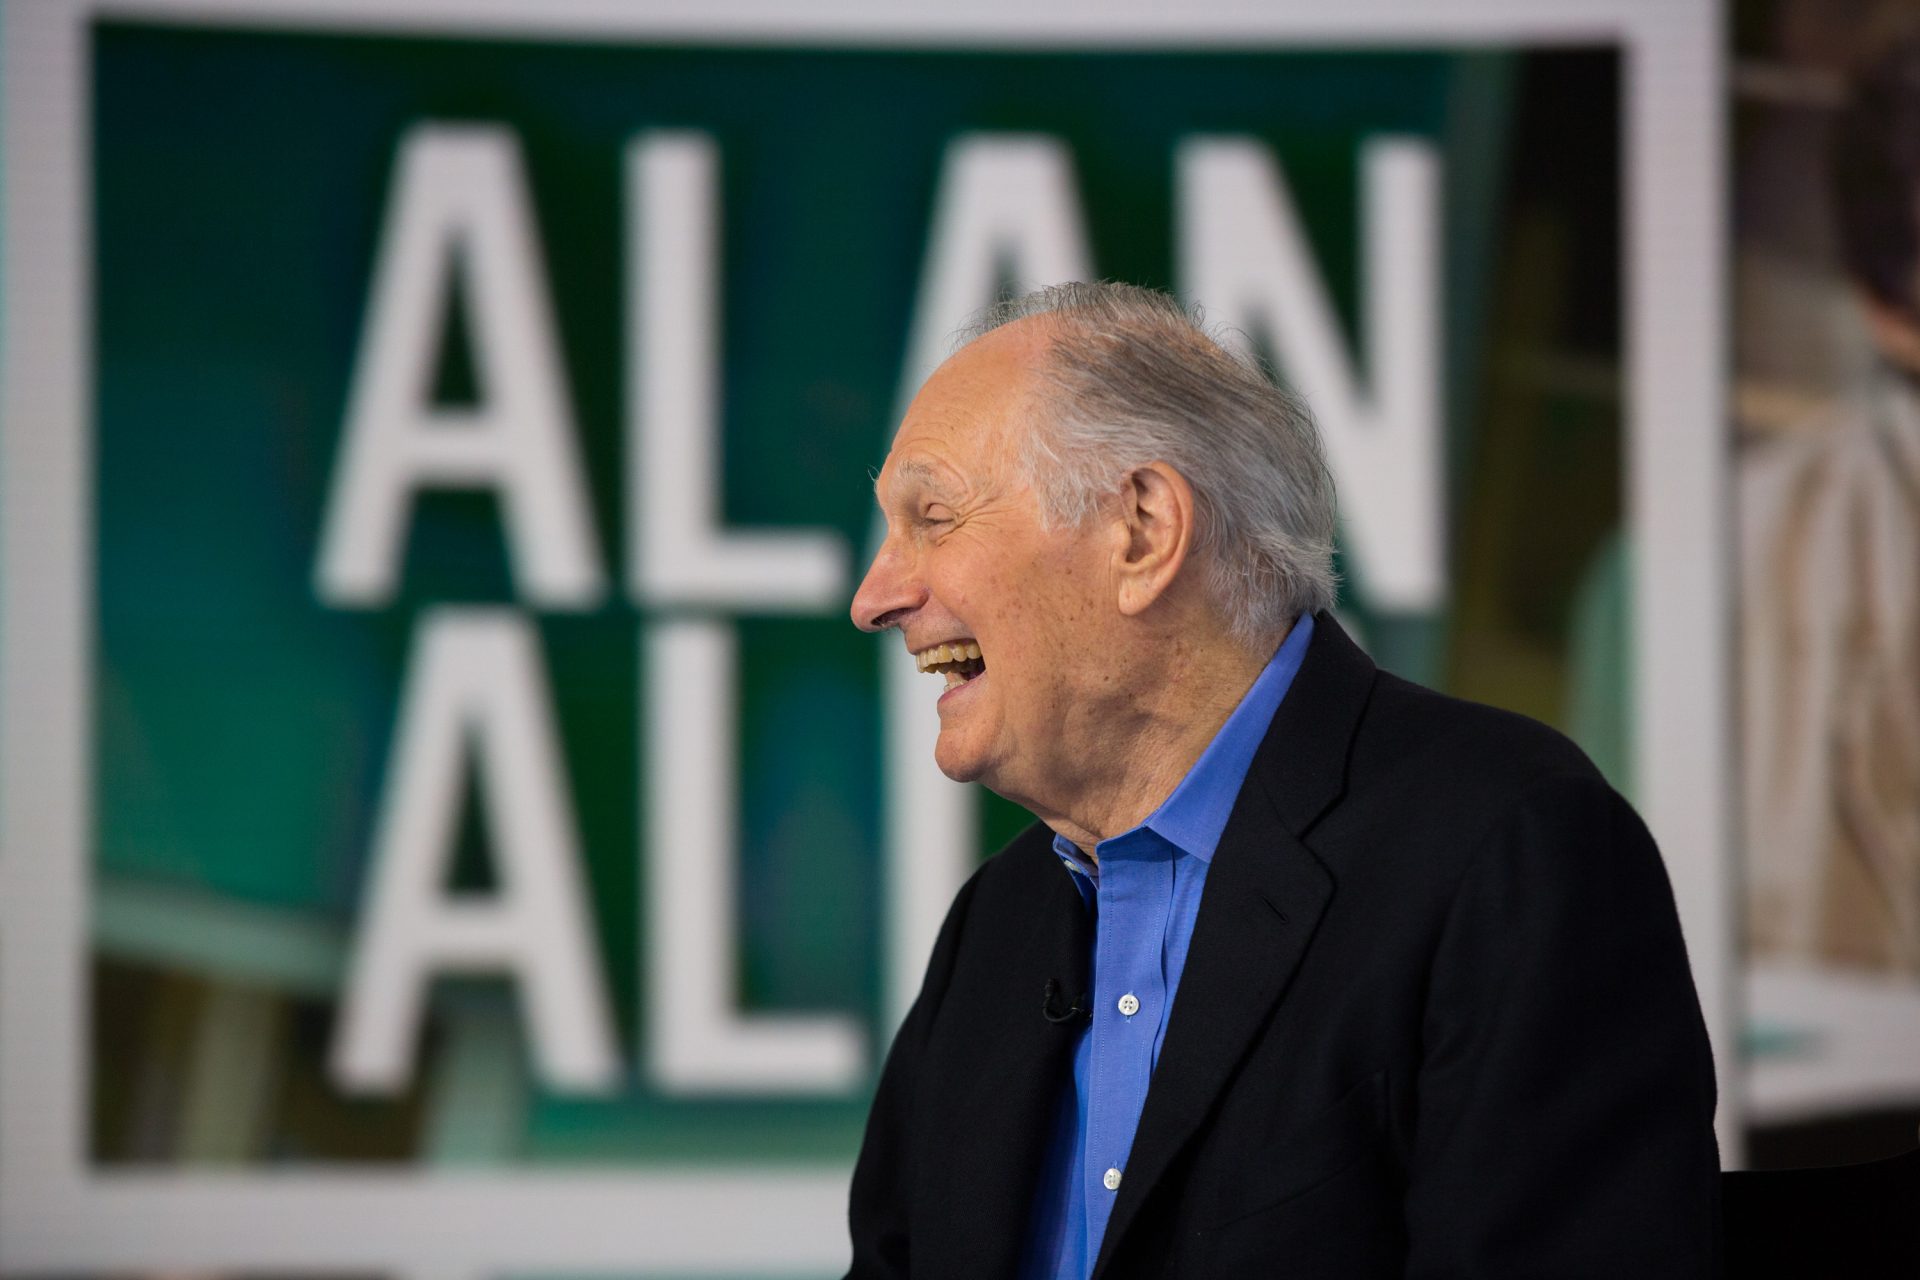 In 2018, Alan Alda revealed that he had been diagnosed with Parkinson's Disease in 2015